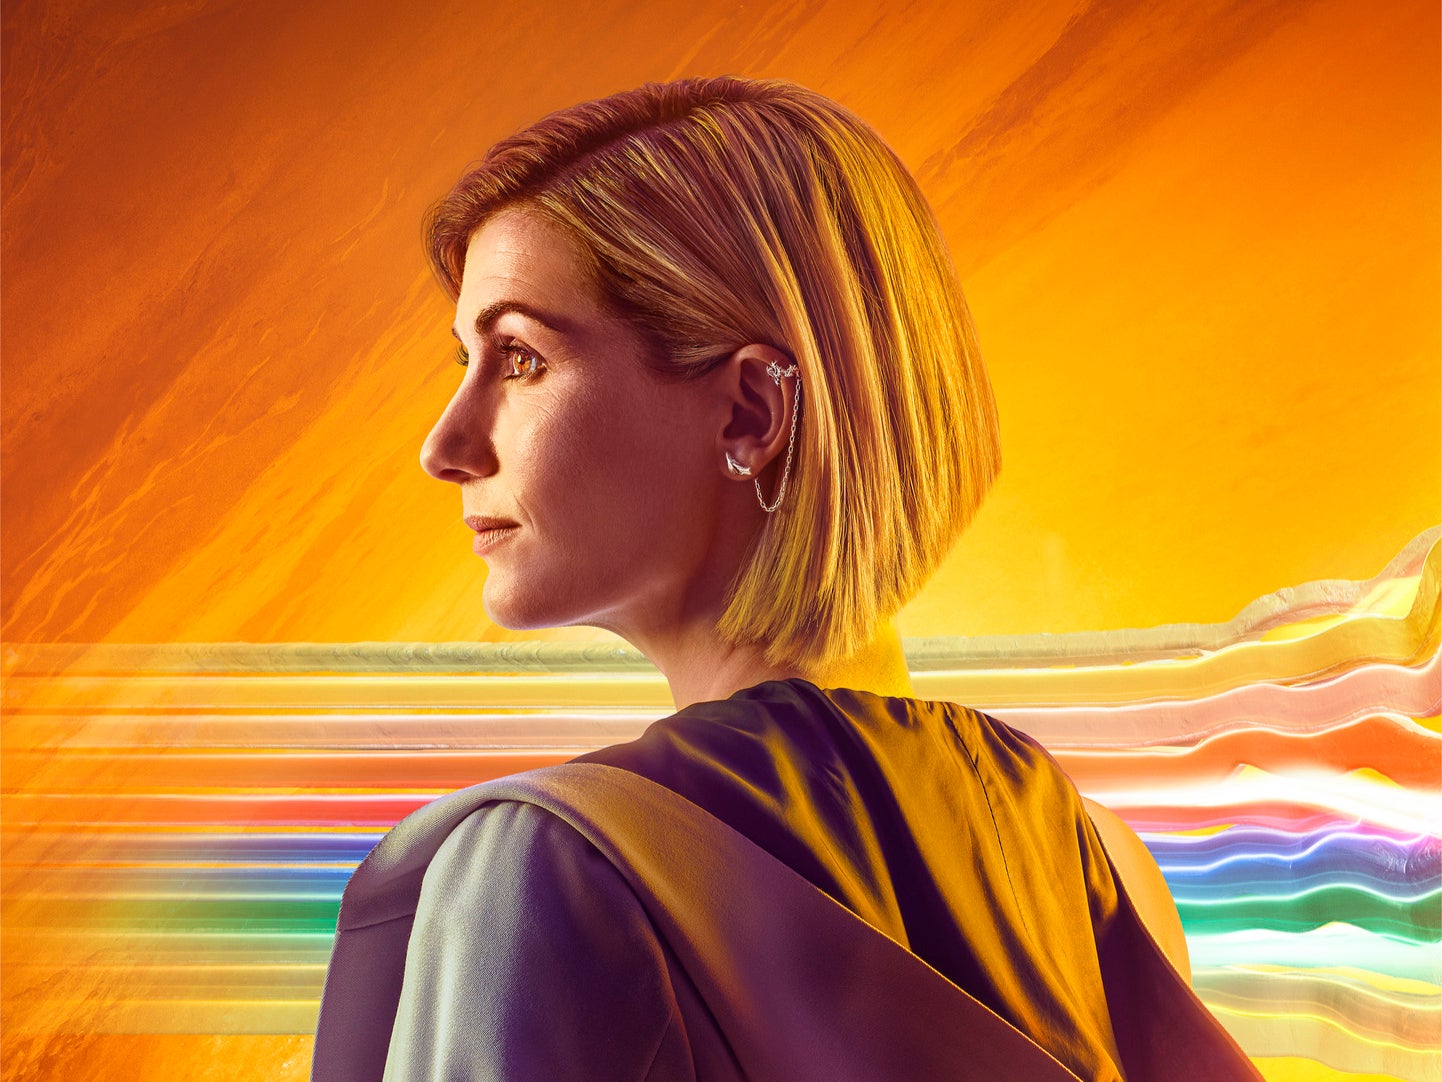 Jodie Whittaker as the 13th Doctor Who